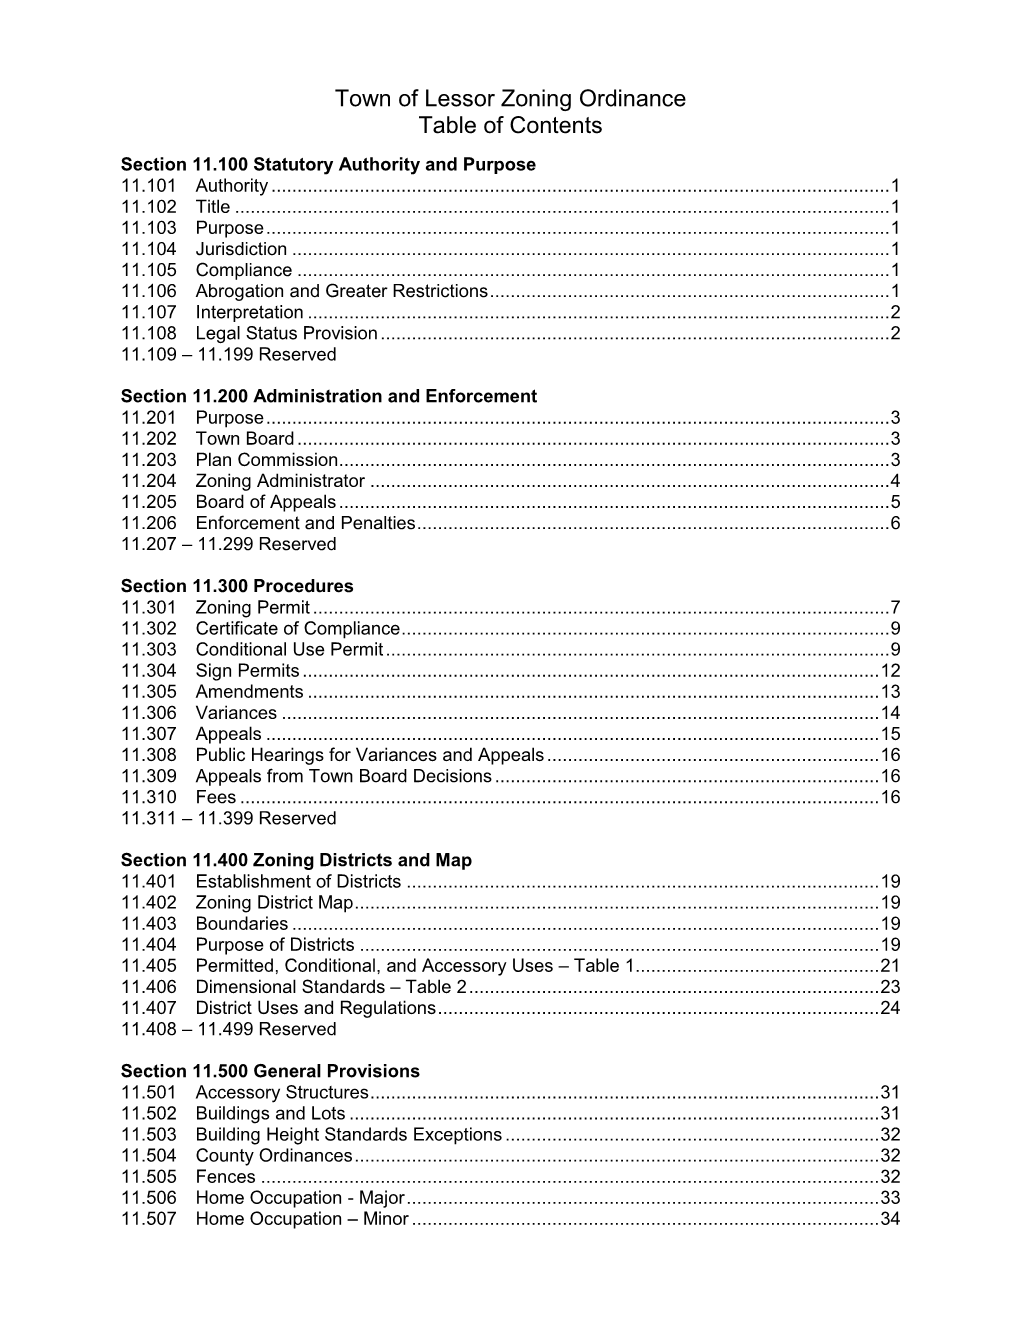 Town of Lessor Zoning Ordinance Table of Contents